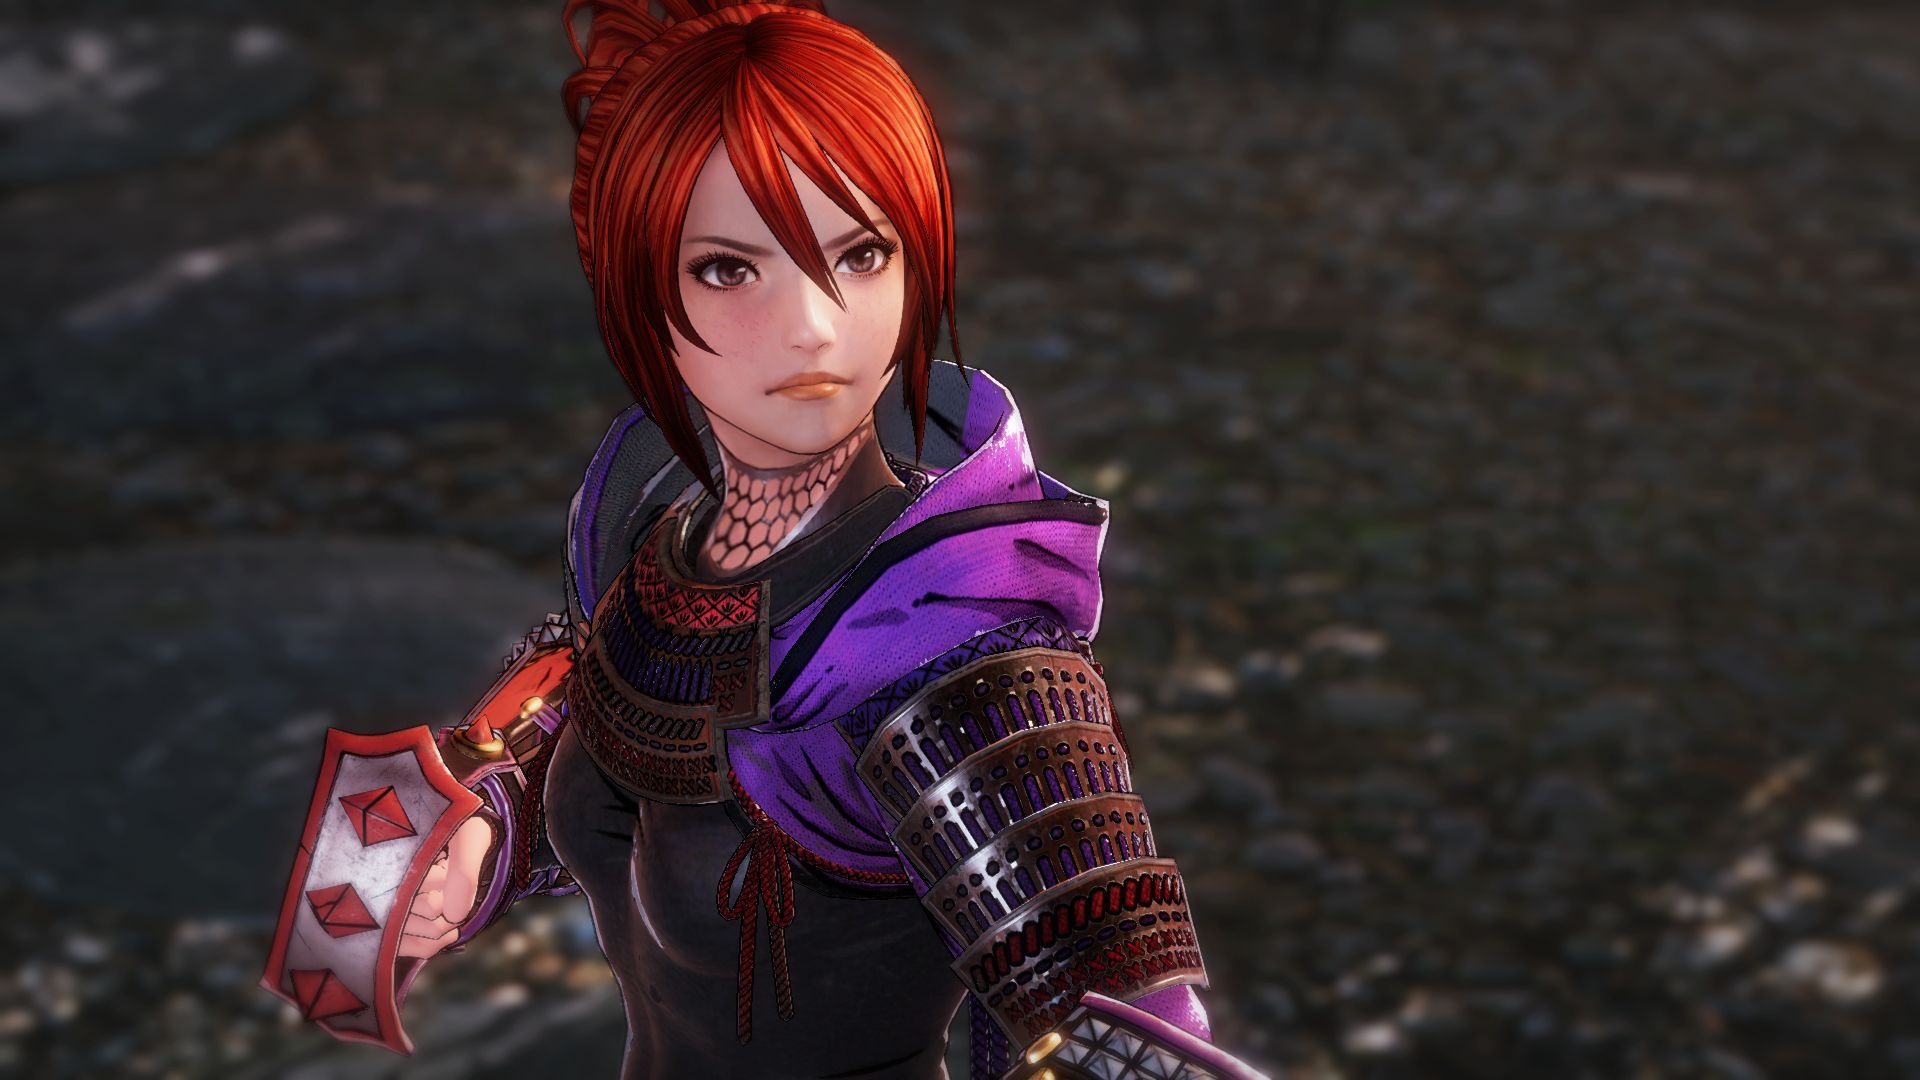 Samurai Warriors 5 Will Have Up To 200 Enemies On Screen But It’s Not The Priority